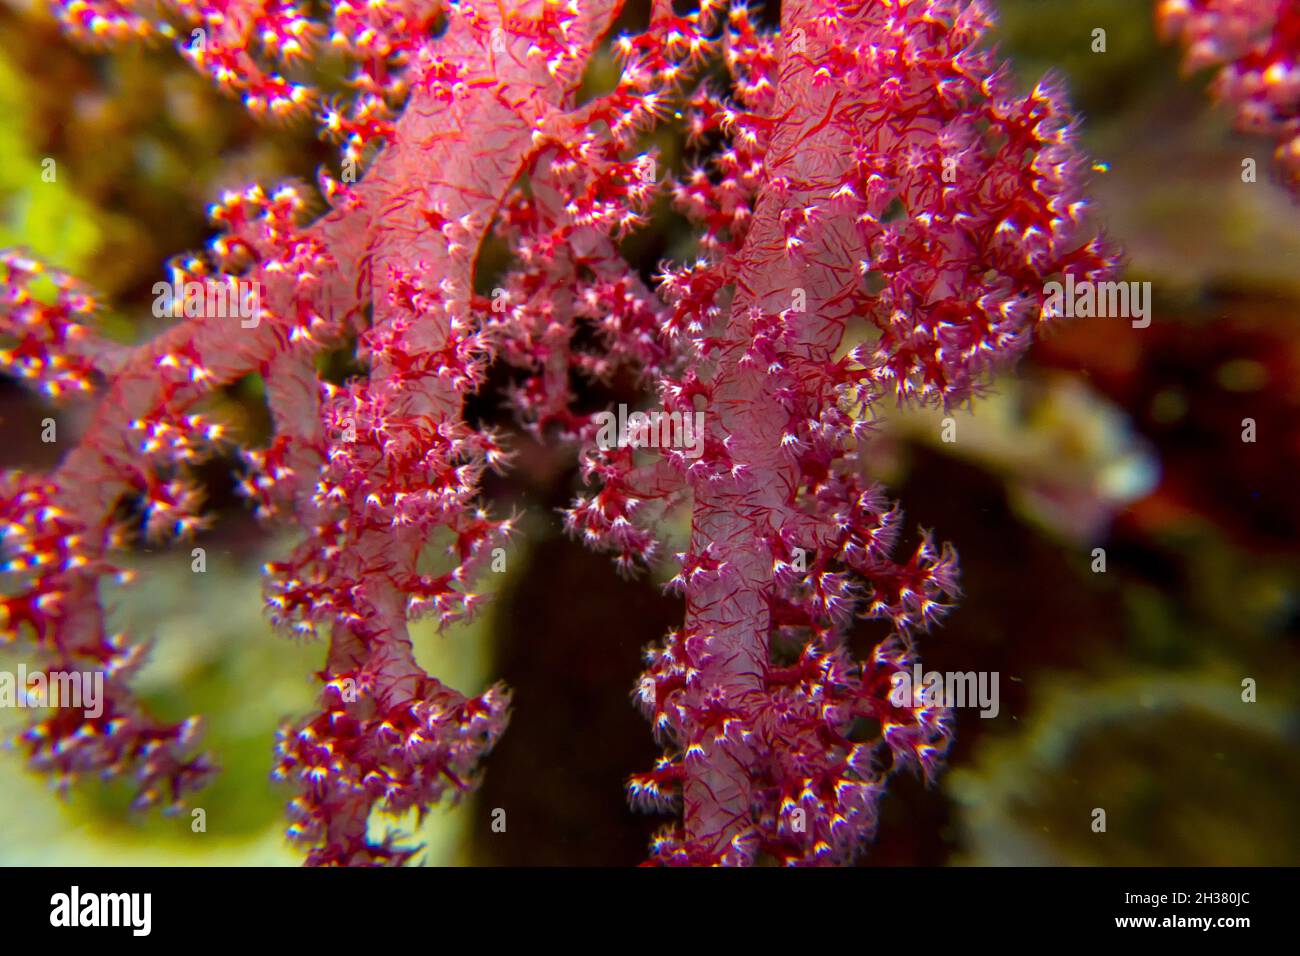 Splendid Knotted Fan Coral (Acabaria spendens) in the Red Sea, Egypt Stock Photo